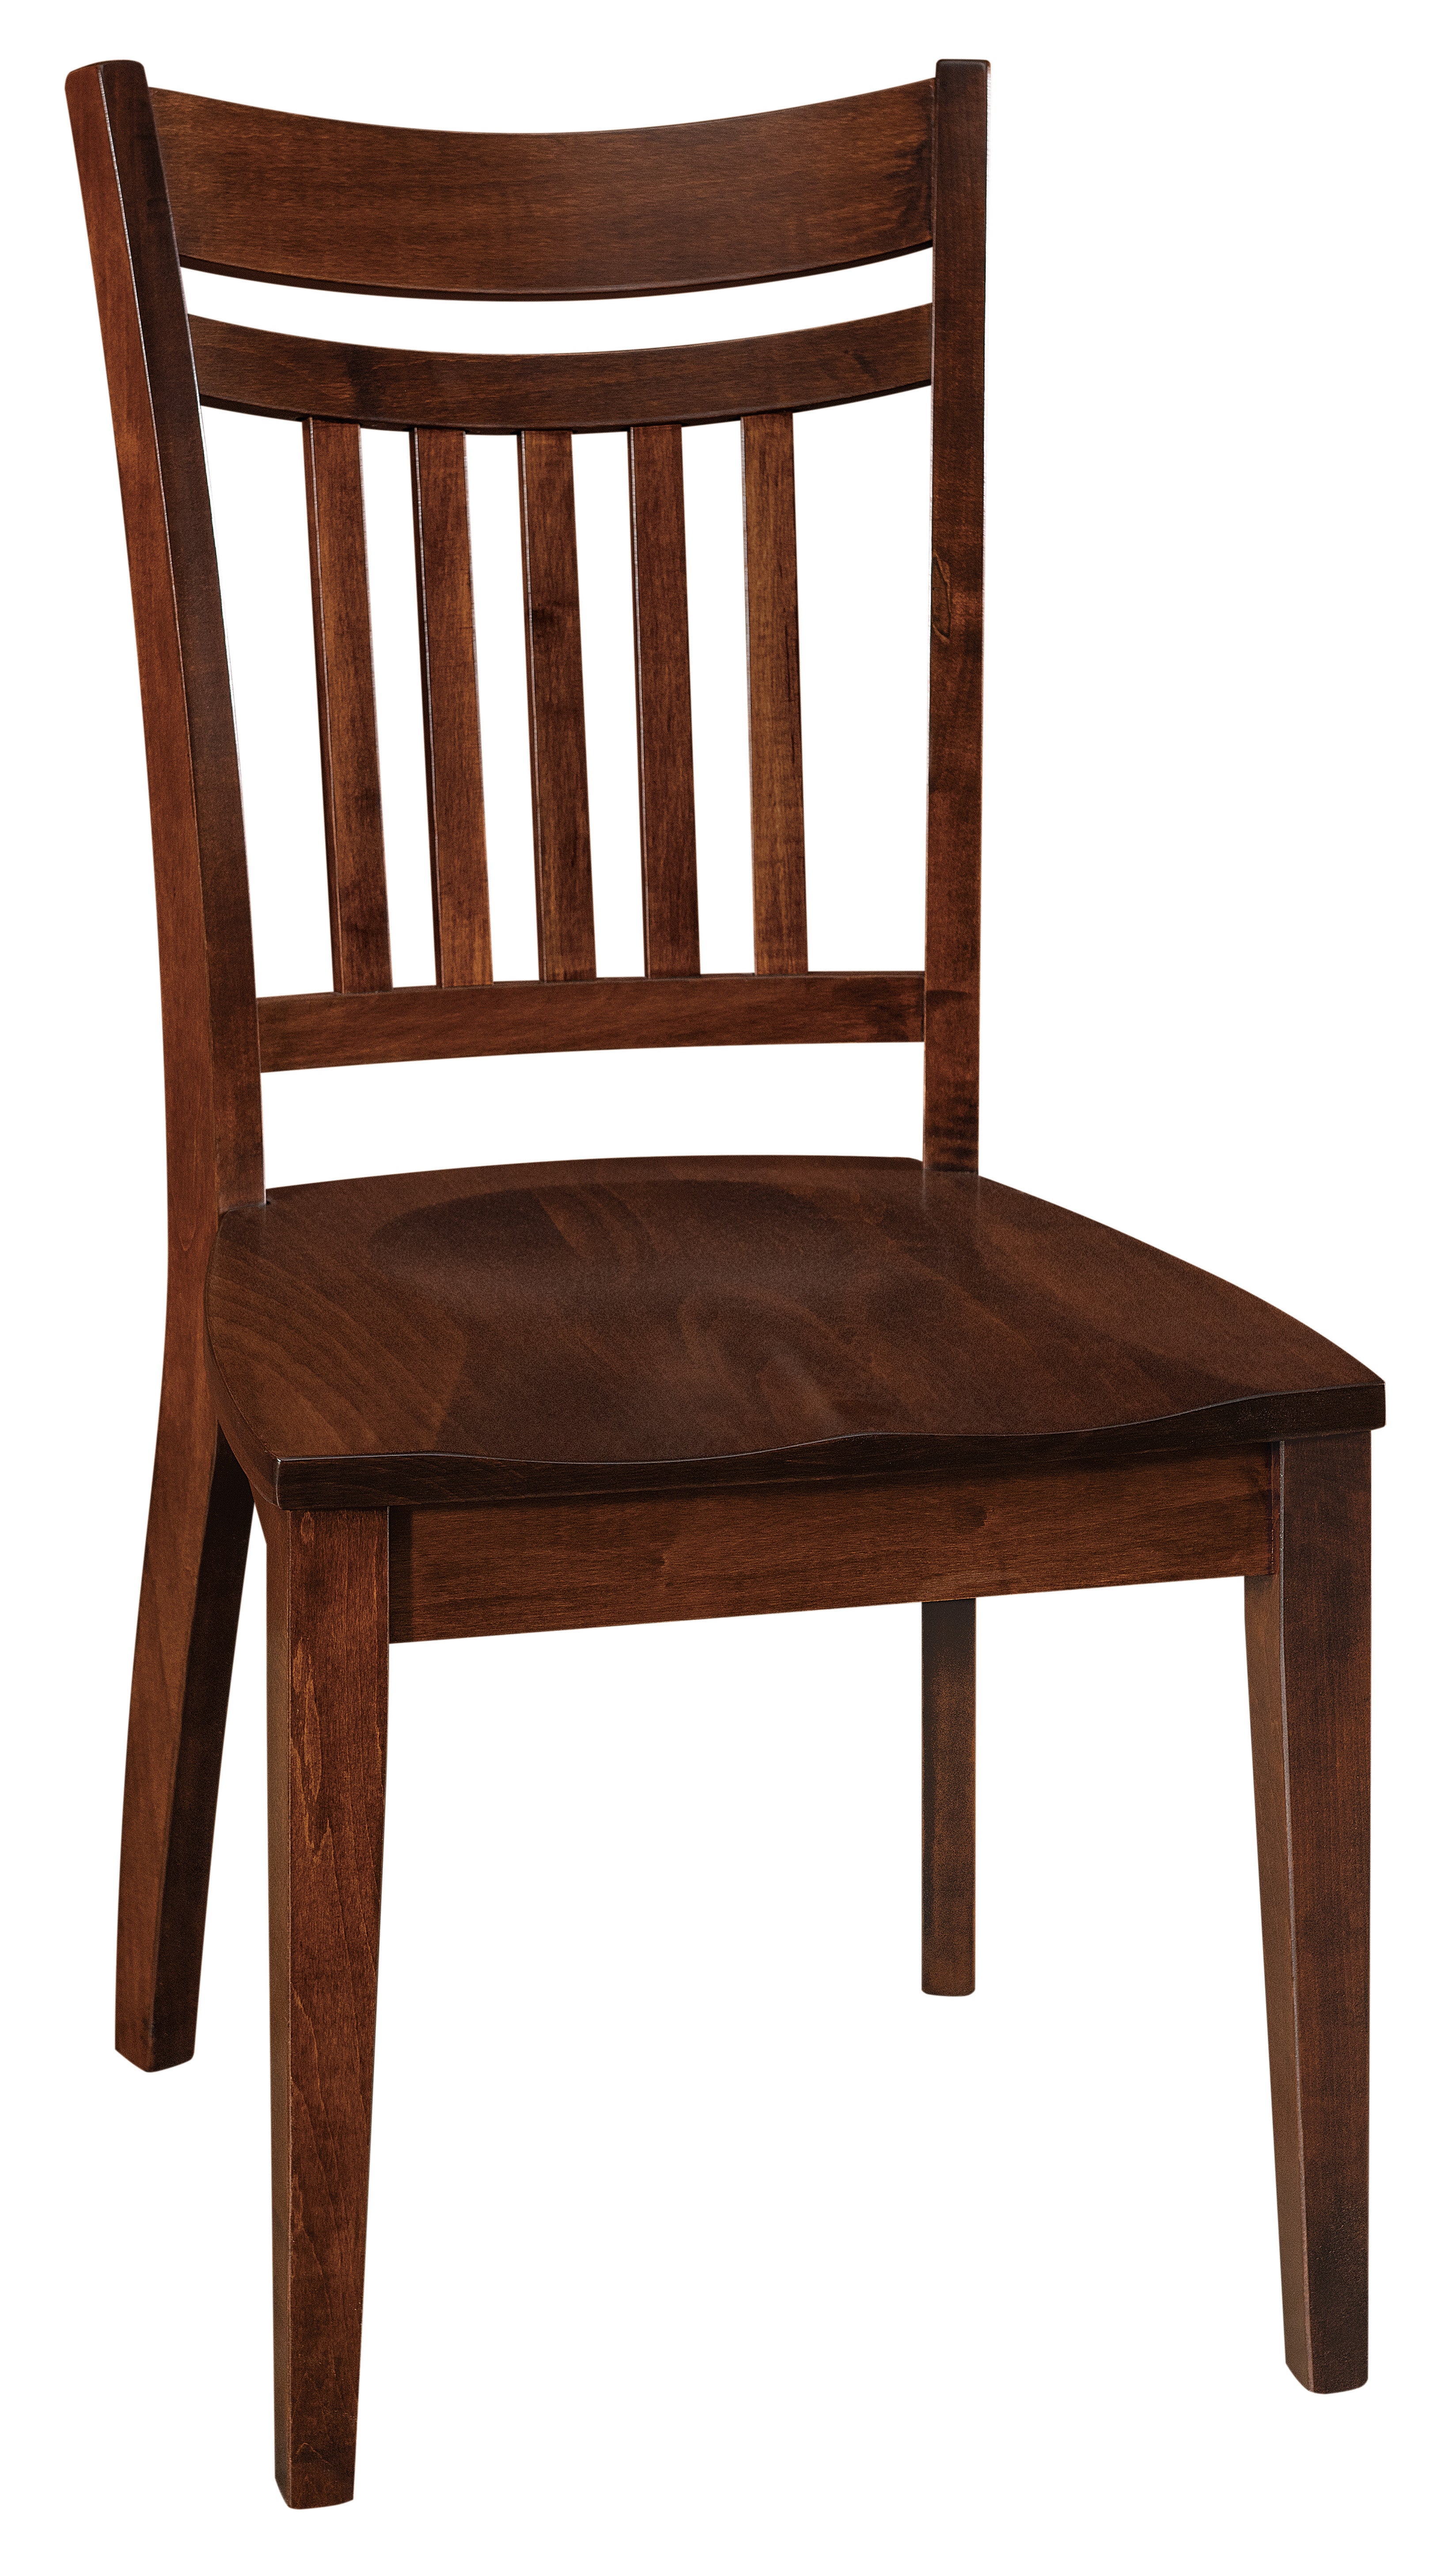 Amish Arbordale Dining Chair